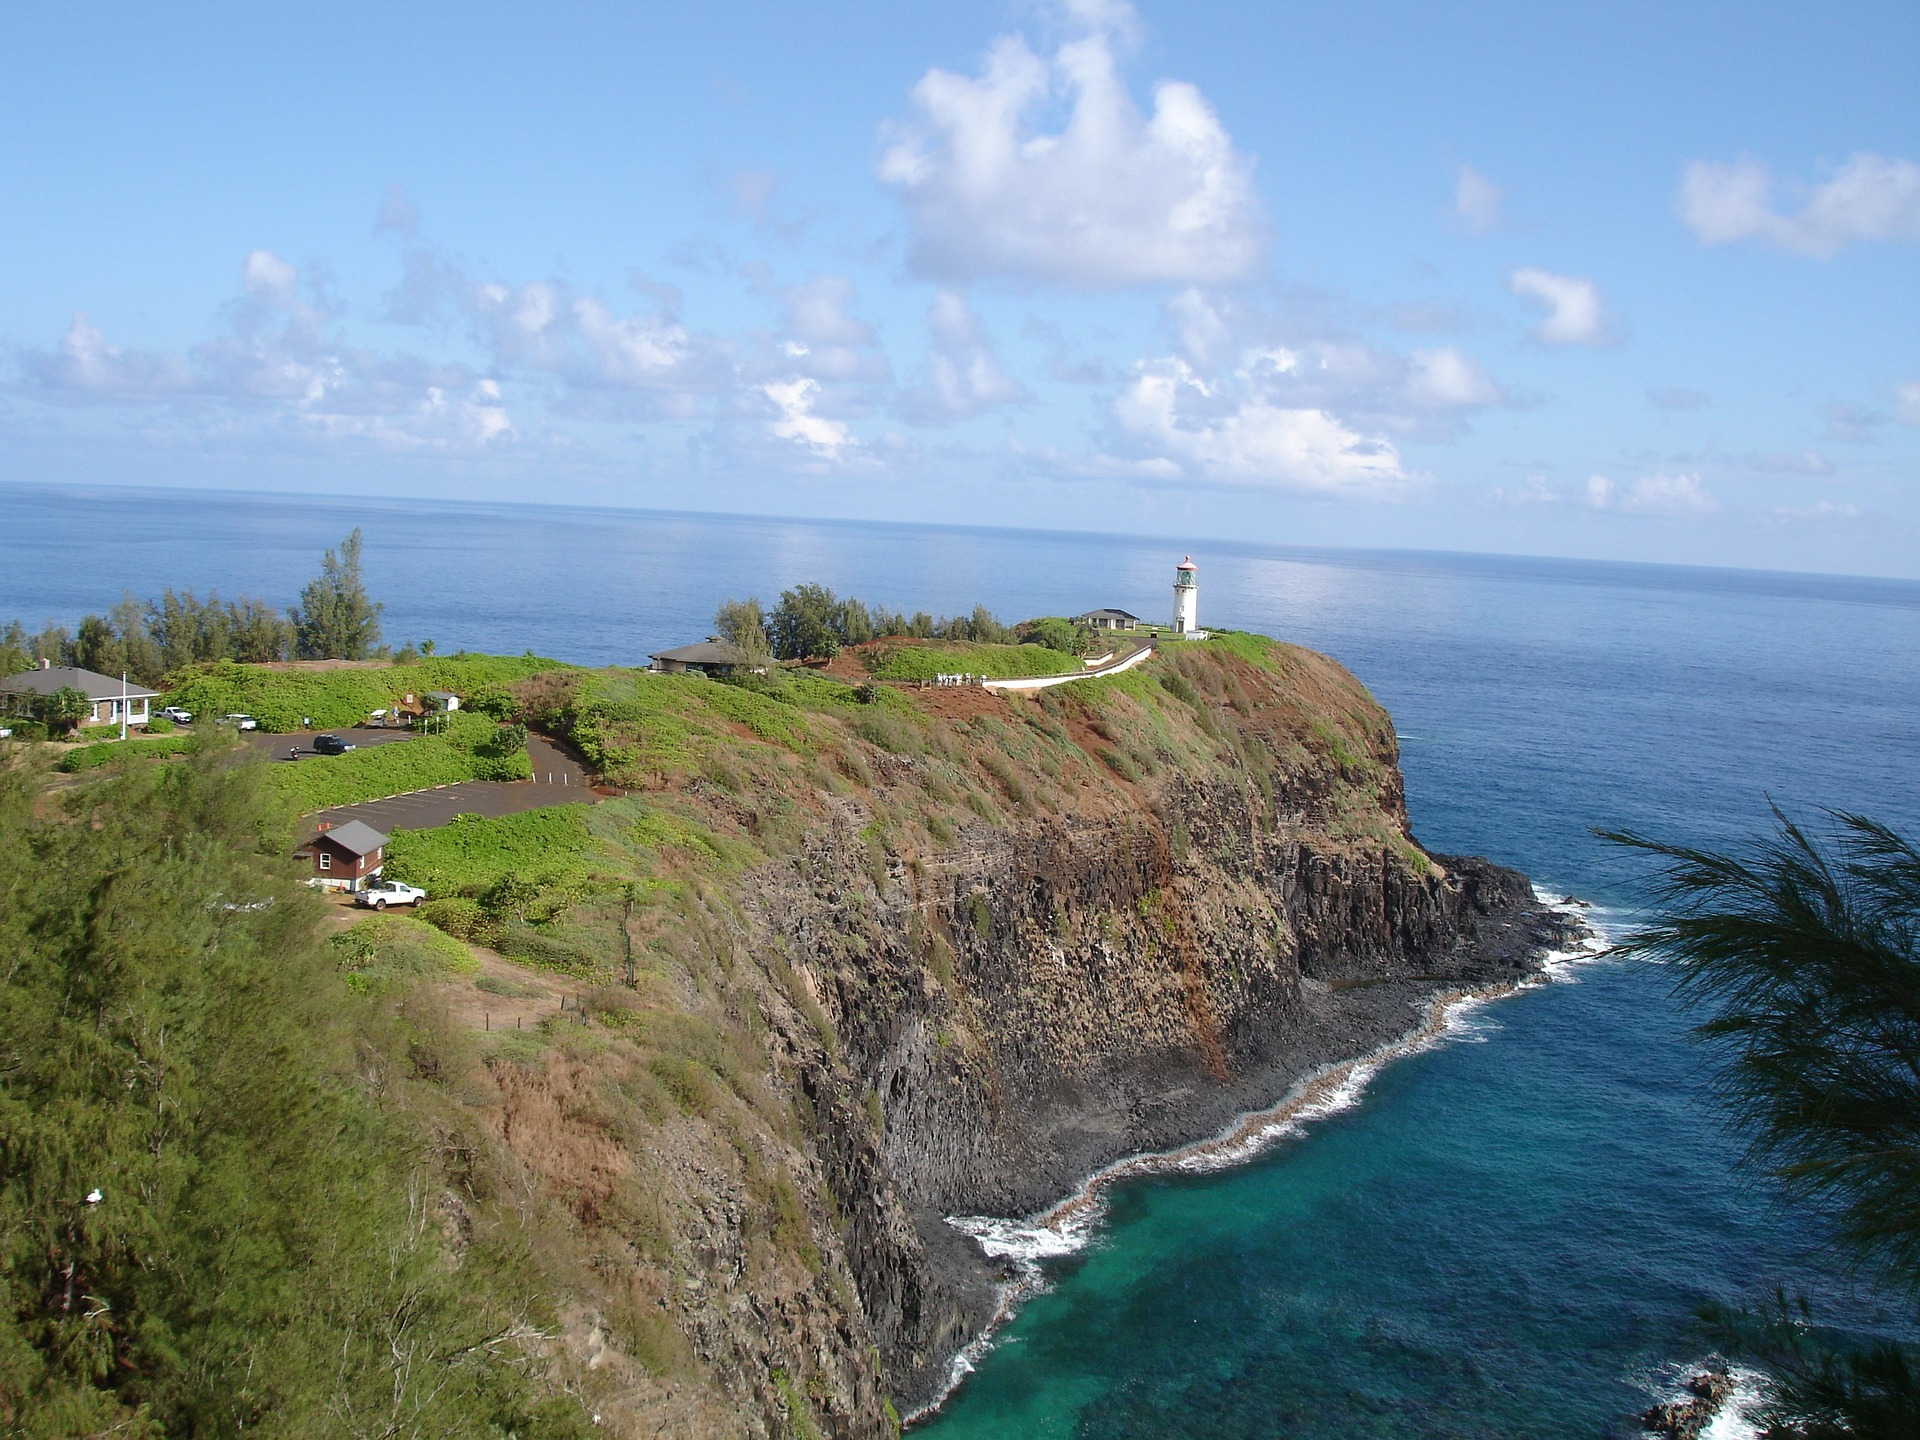 An aerial view of Kilauea Lighthouse in Kauai. A lighthouse is visible on land by the sea with green plants.